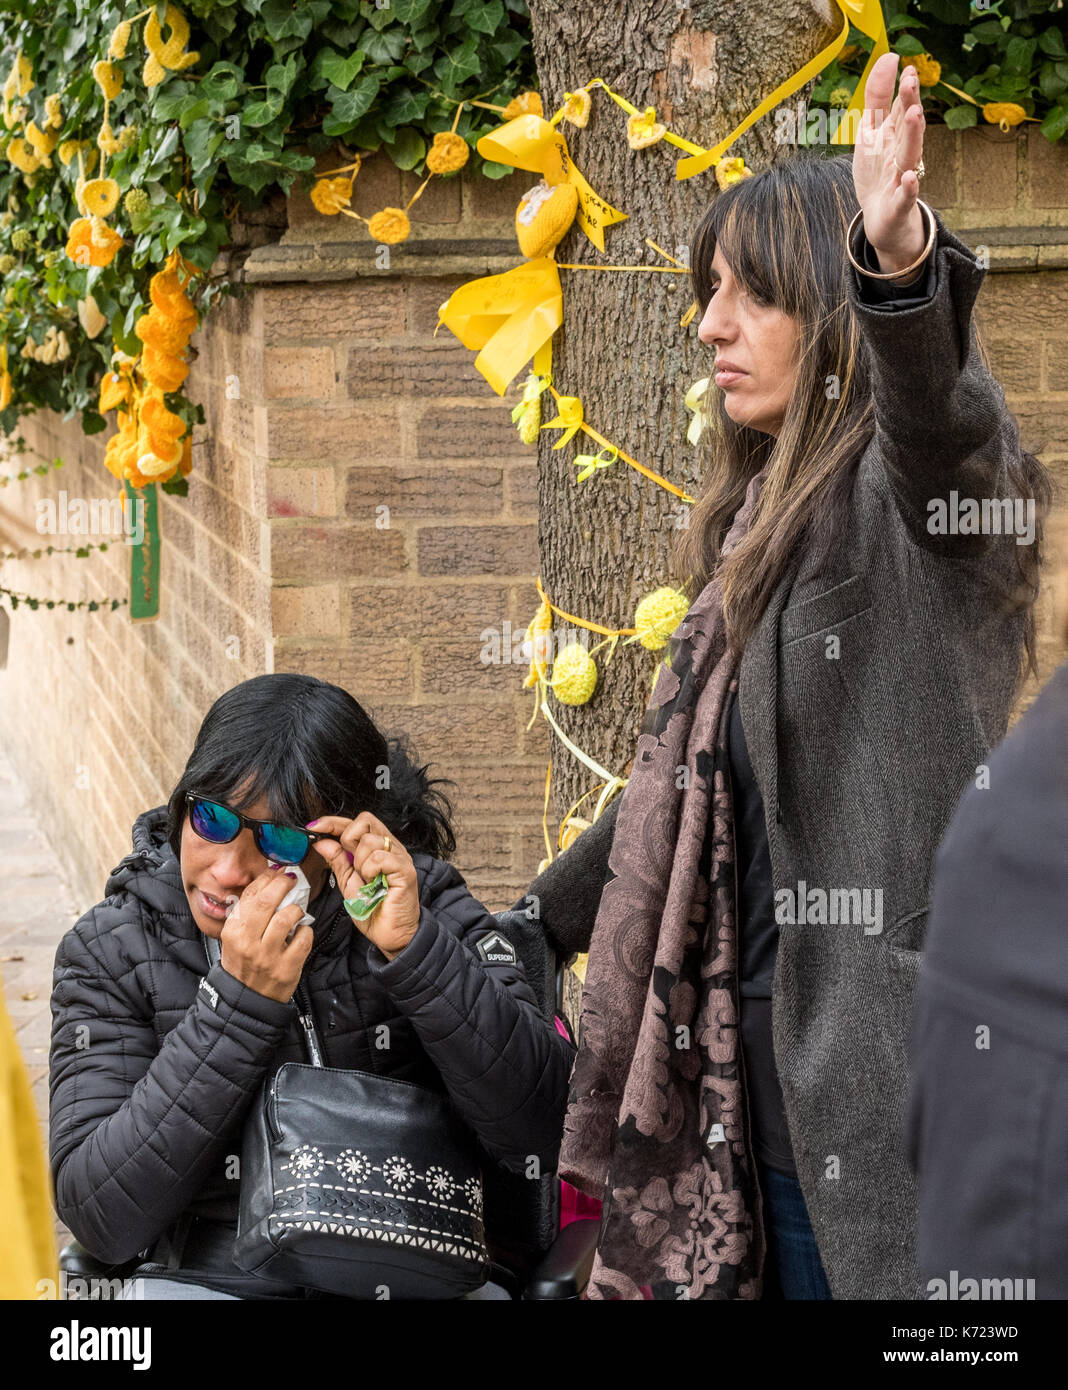 Kensington, London, UK. 14th Sep, 2017. Notting Hill Methodist Church was used for a live video feed from the Grenfell Tower inquiry and was attended by survivors and local residents who expressed a lack of confidence in the process. Several complained they had yet to be rehoused or compensated for their loss. Survivors protest outside the overflow inquiry Credit: Ian Davidson/Alamy Live News Stock Photo